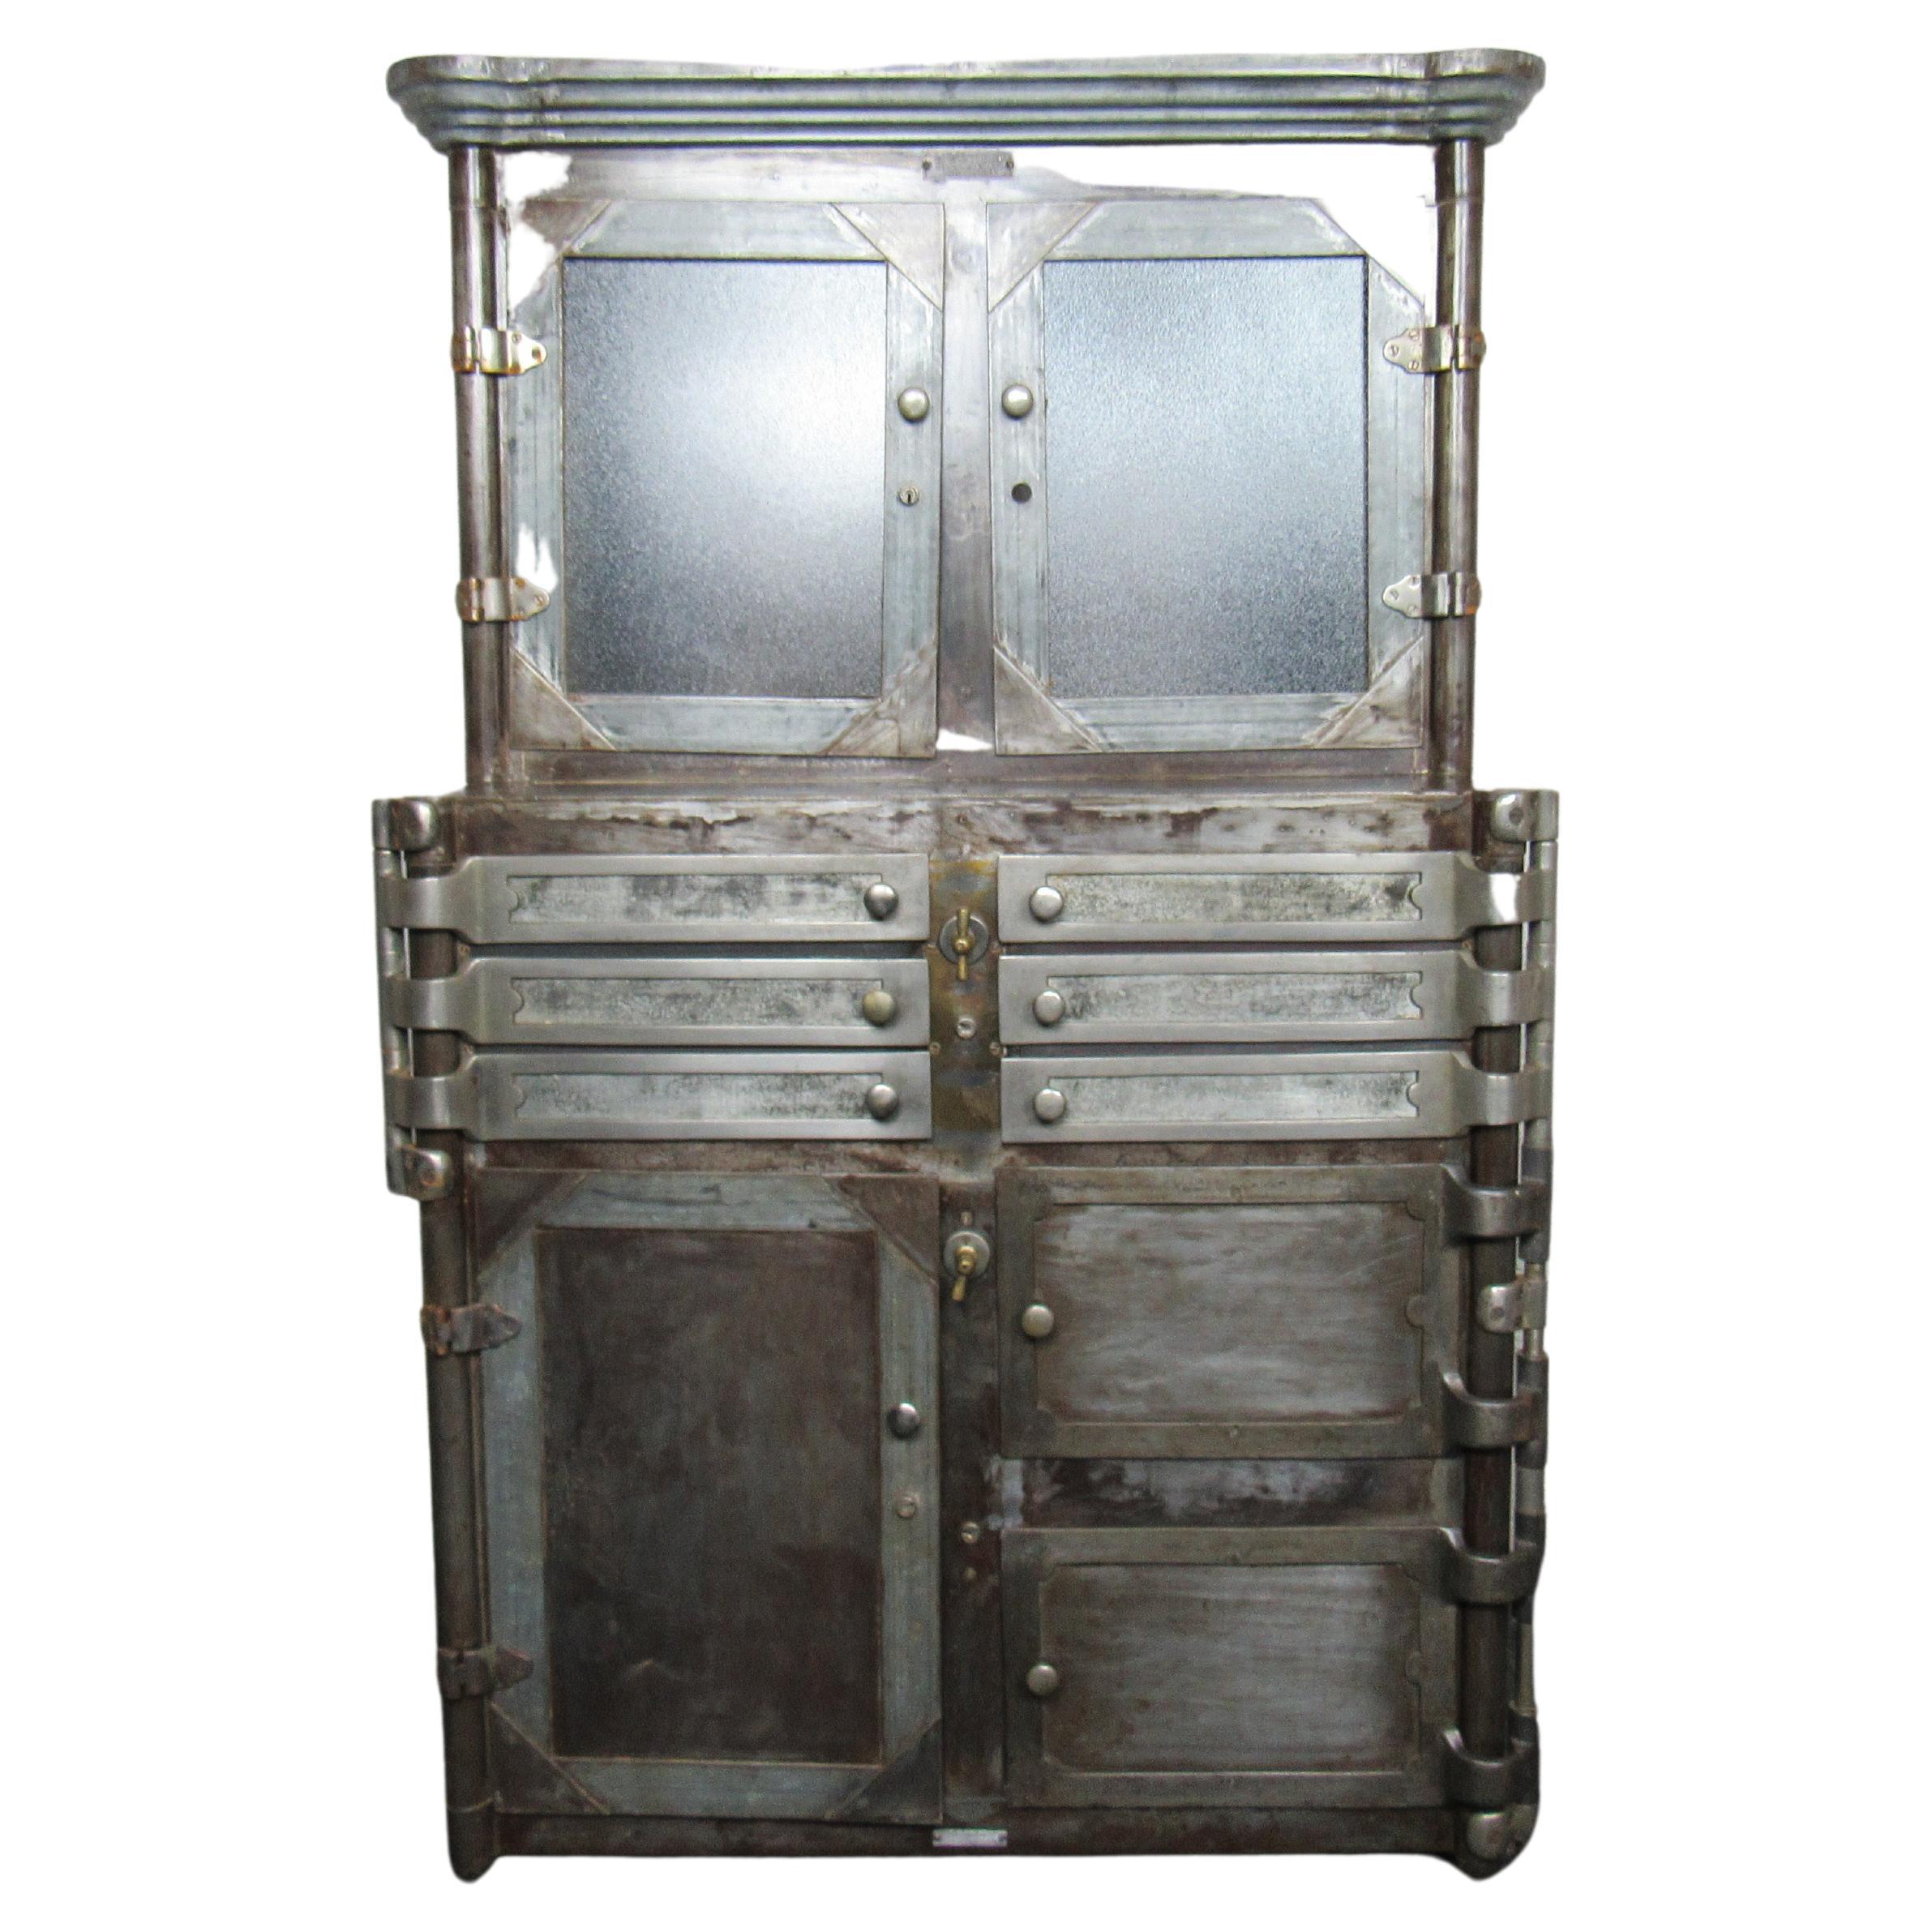 With a generous amount of drawers and compartments, this industrial metal cabinet offers plenty of storage space in a weathered design full of character. Please confirm item location with seller (NY/NJ).